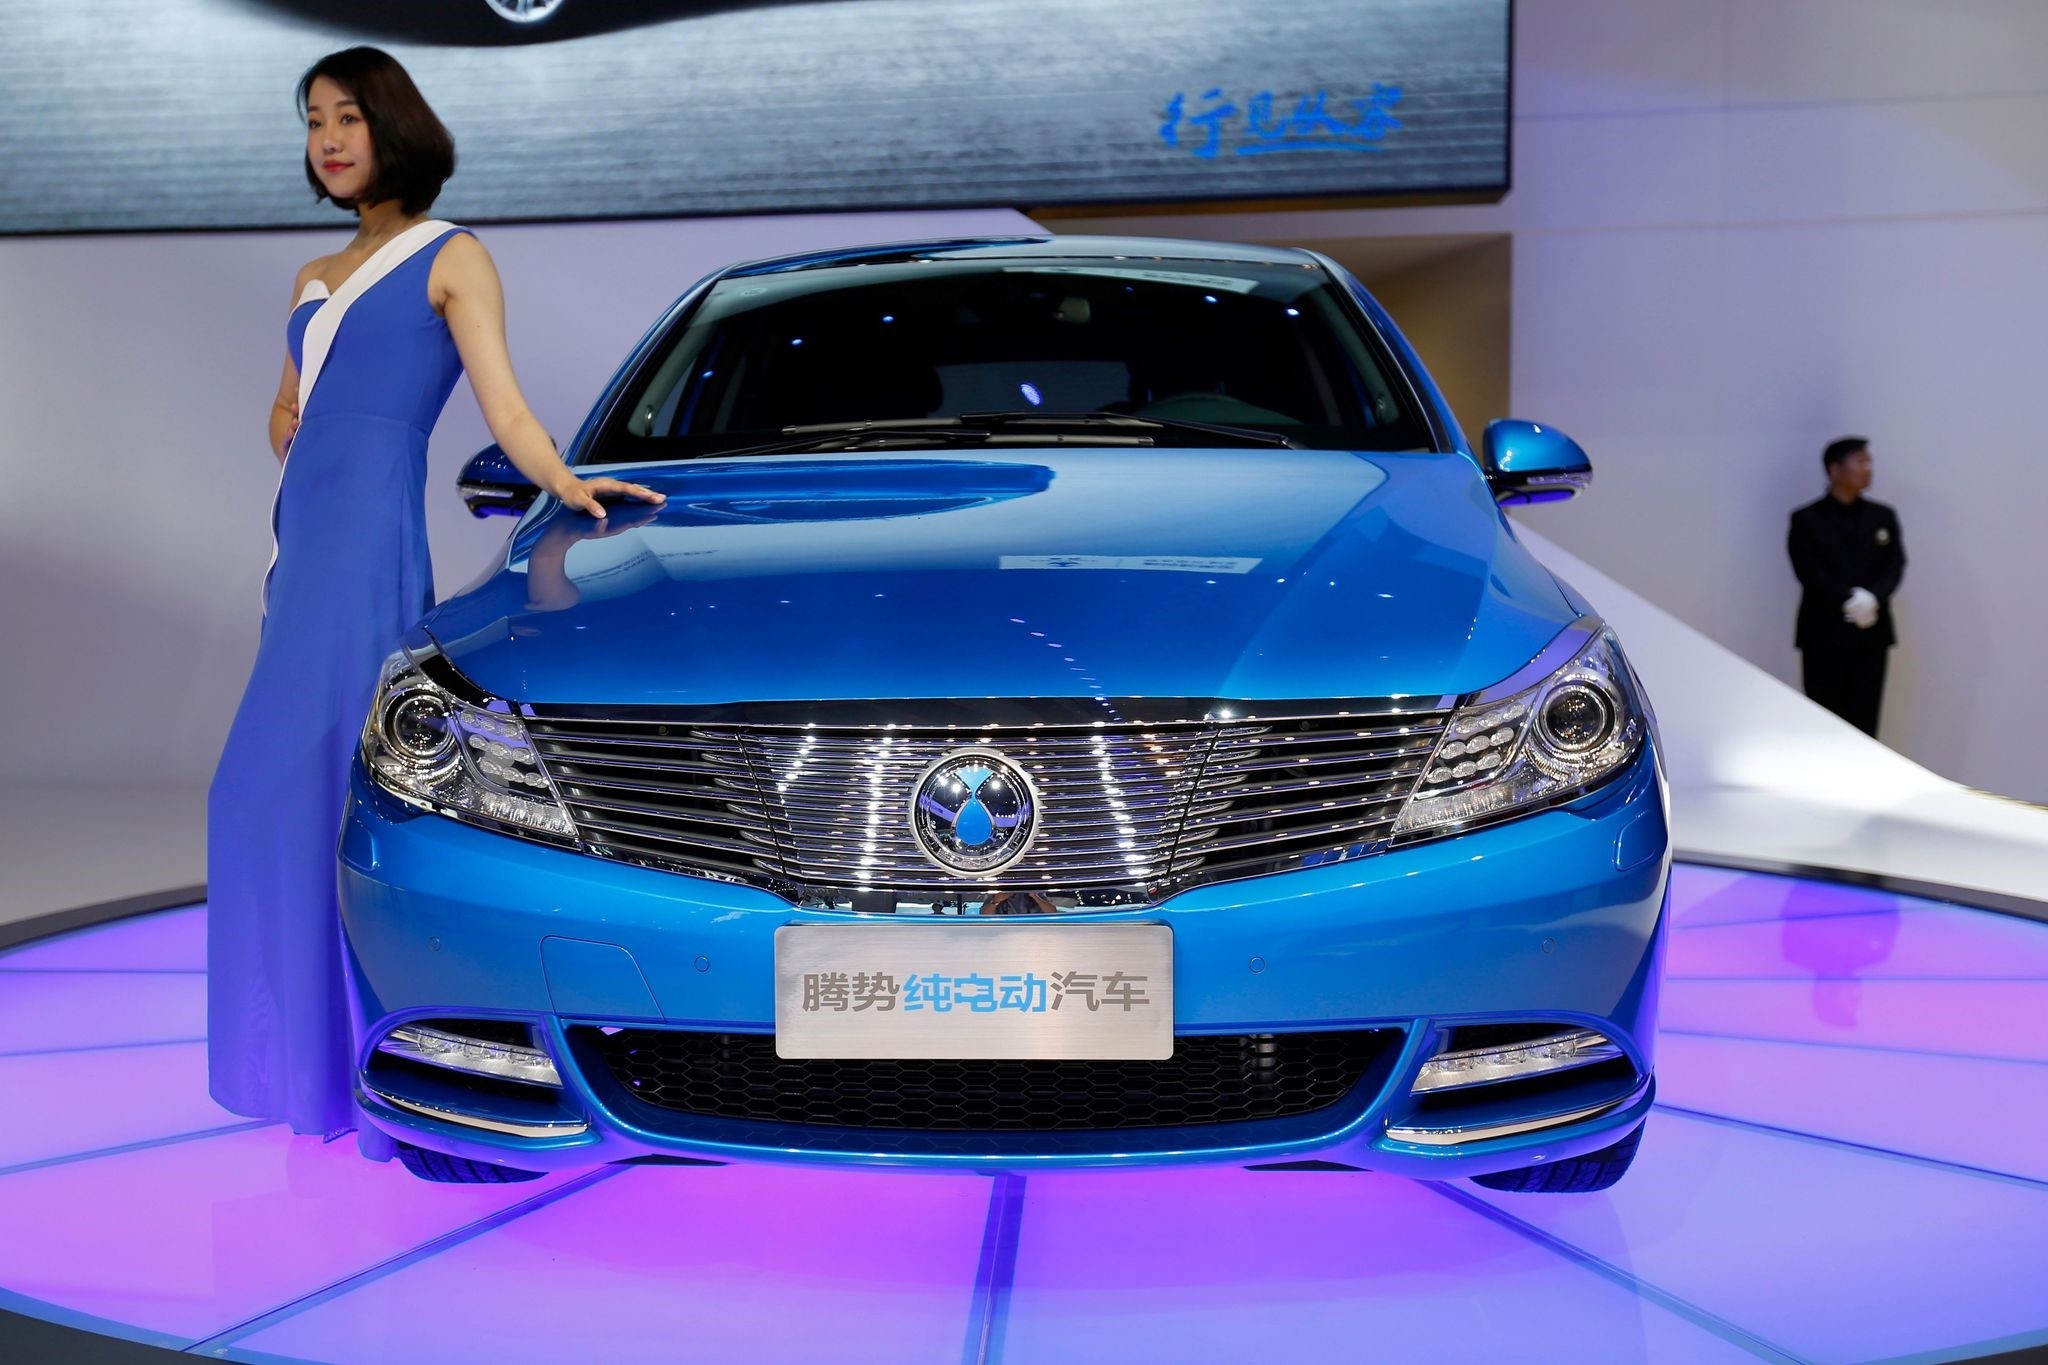 A DENZA EV car displayed during the first day of the 17th Shanghai International Automobile Industry Exhibition in Shanghai.